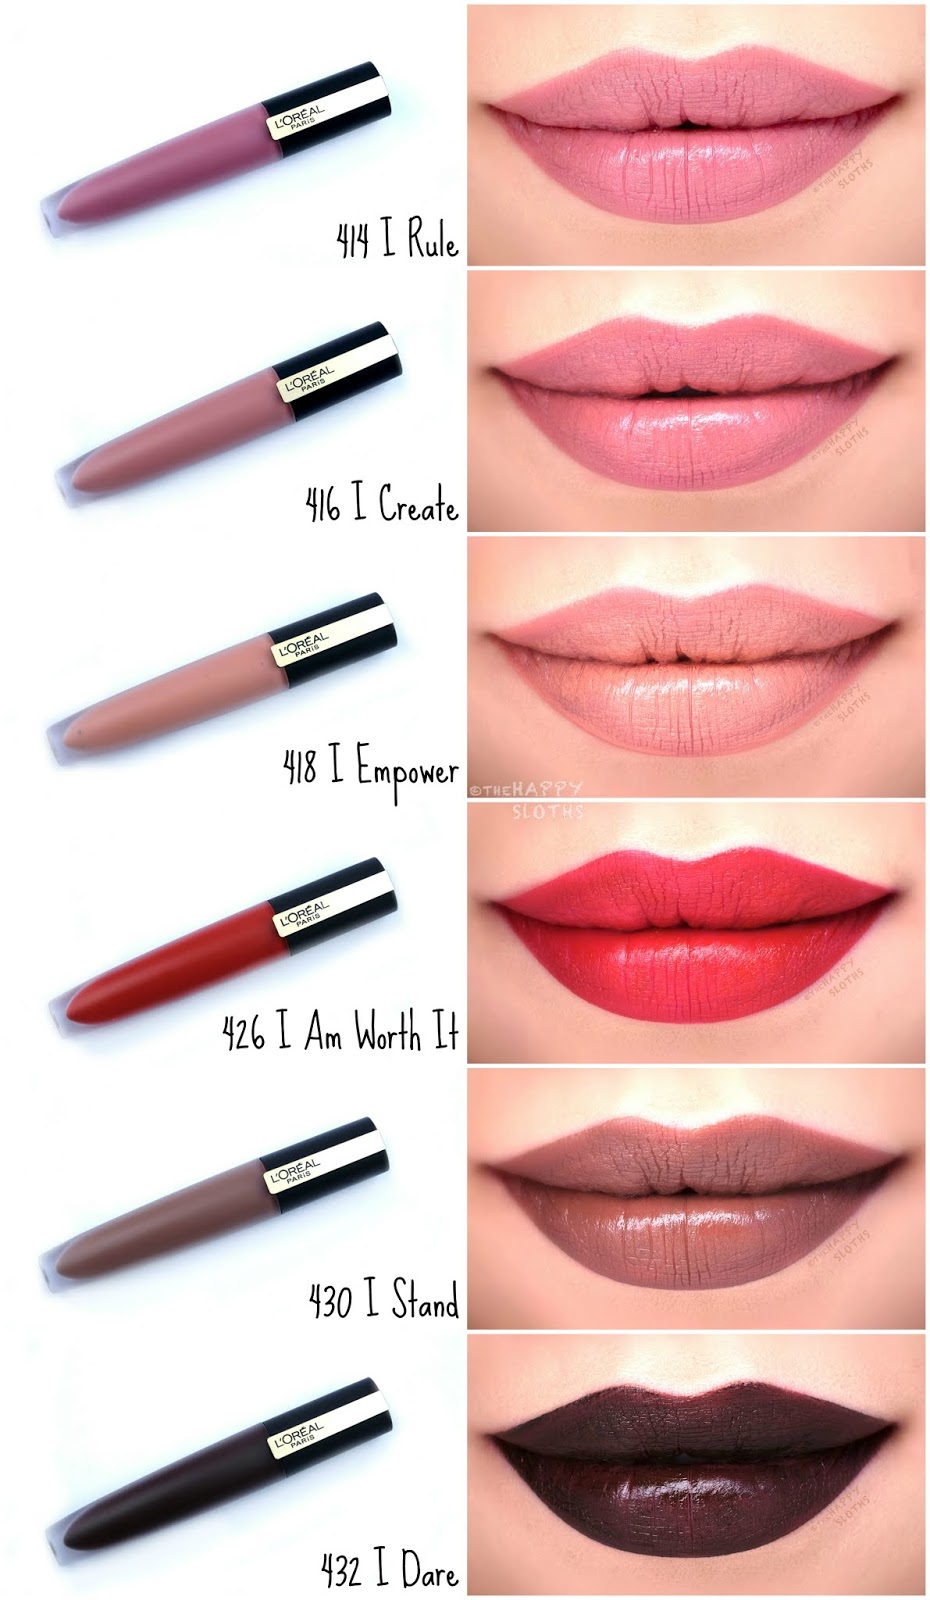 L'Oreal | Rouge Signature Matte Liquid Lipstick: Review and Swatches